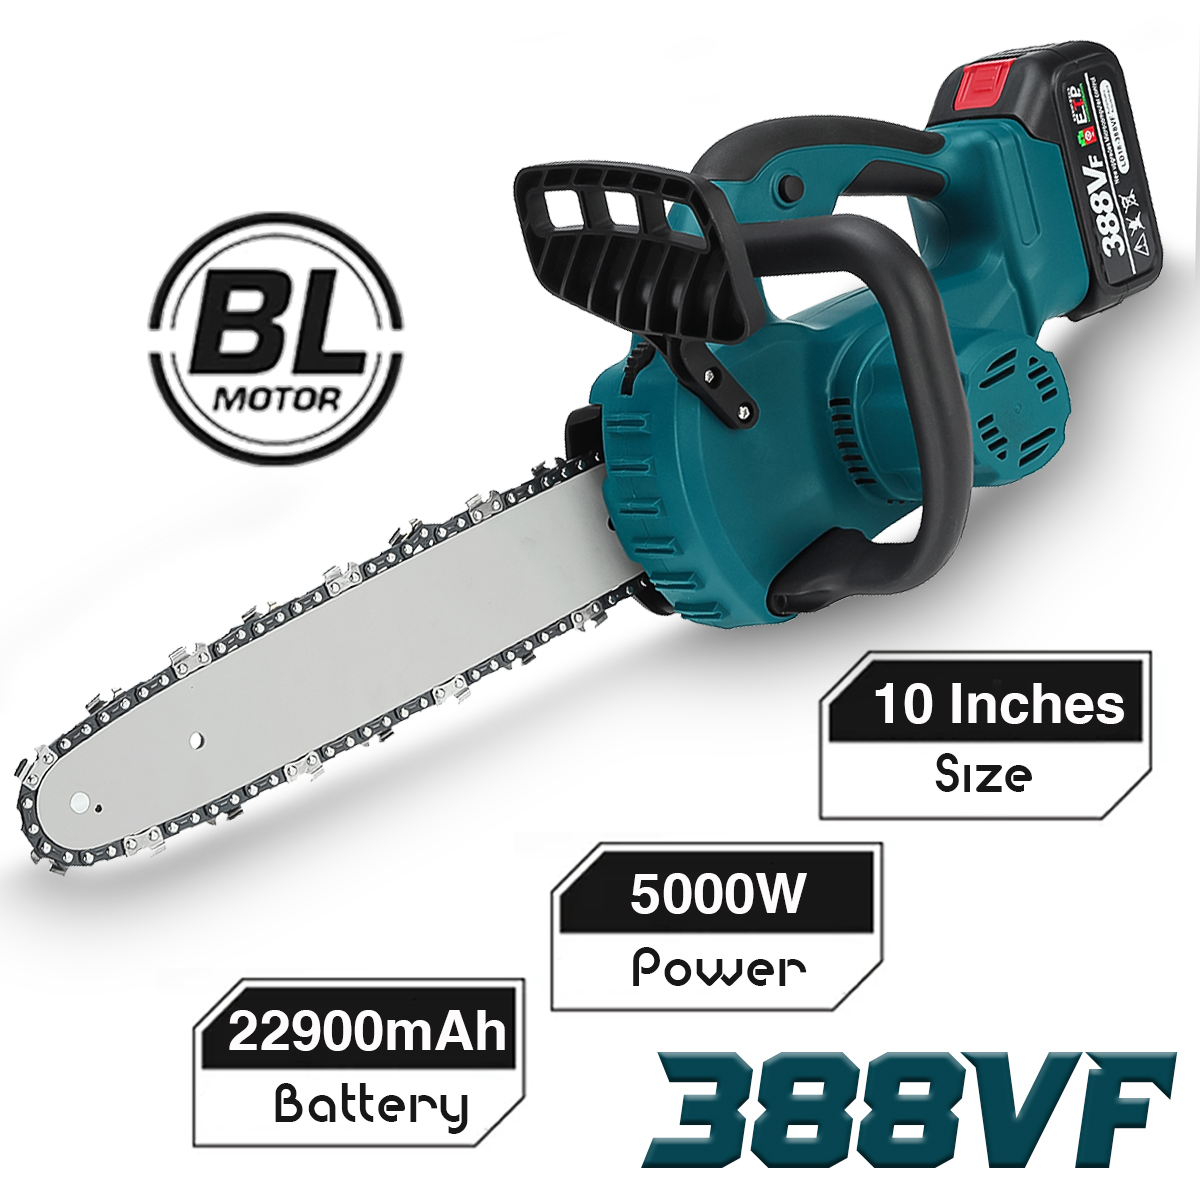 388VF-5000W-10-Inch-Portable-Electric-Chain-Saw-Pruning-Chain-Saw-Rechargeable-Woodworking-Power-Too-1919274-1